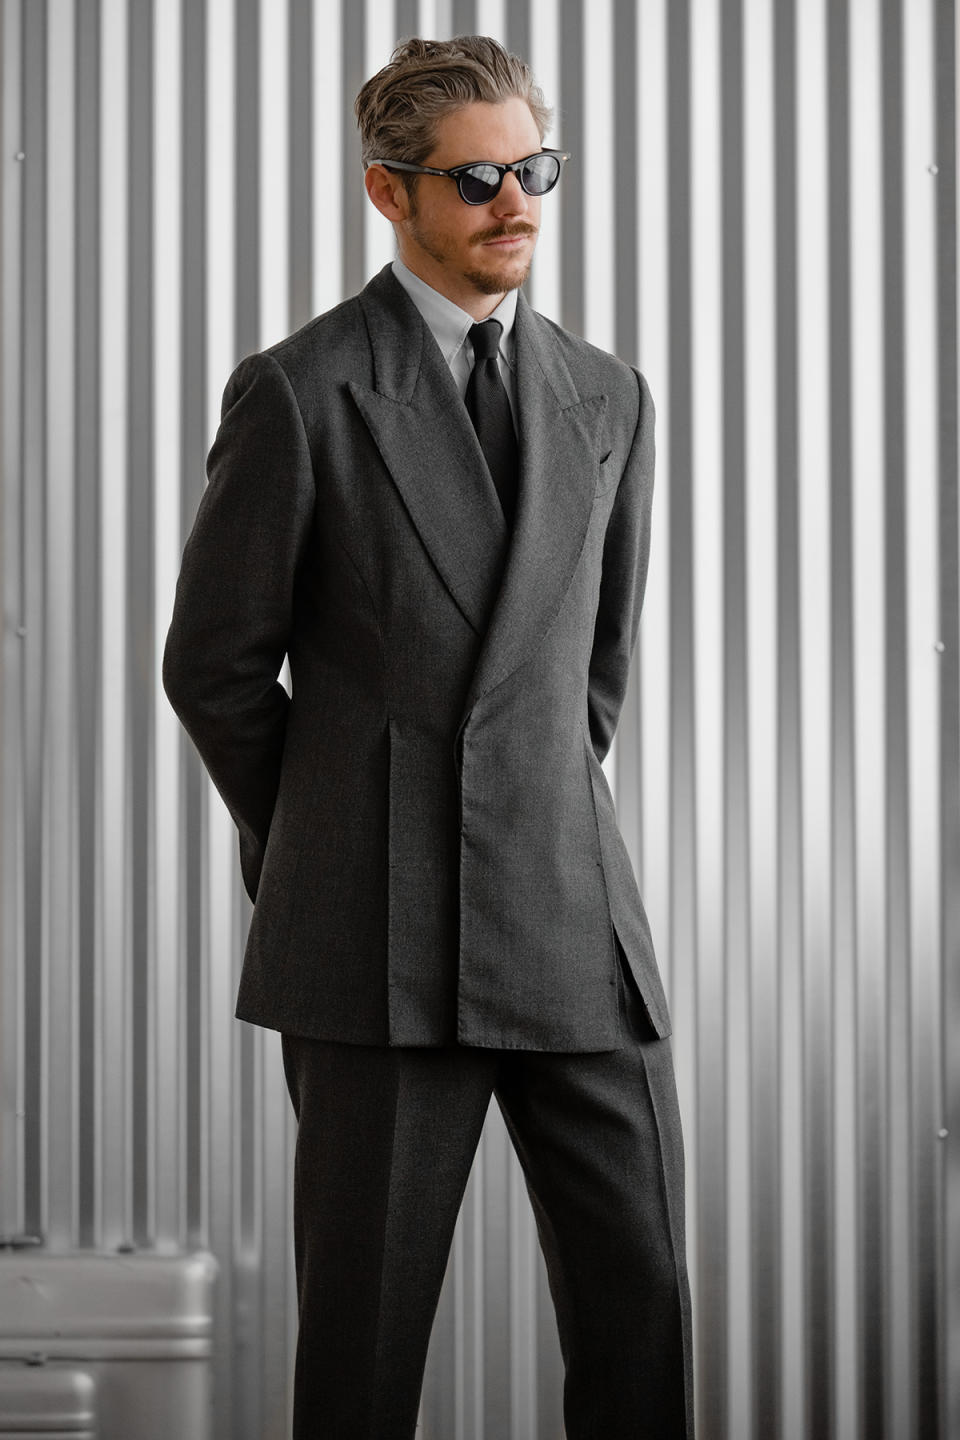 Robert Spangle wearing the Observer Collection's STRO suit.